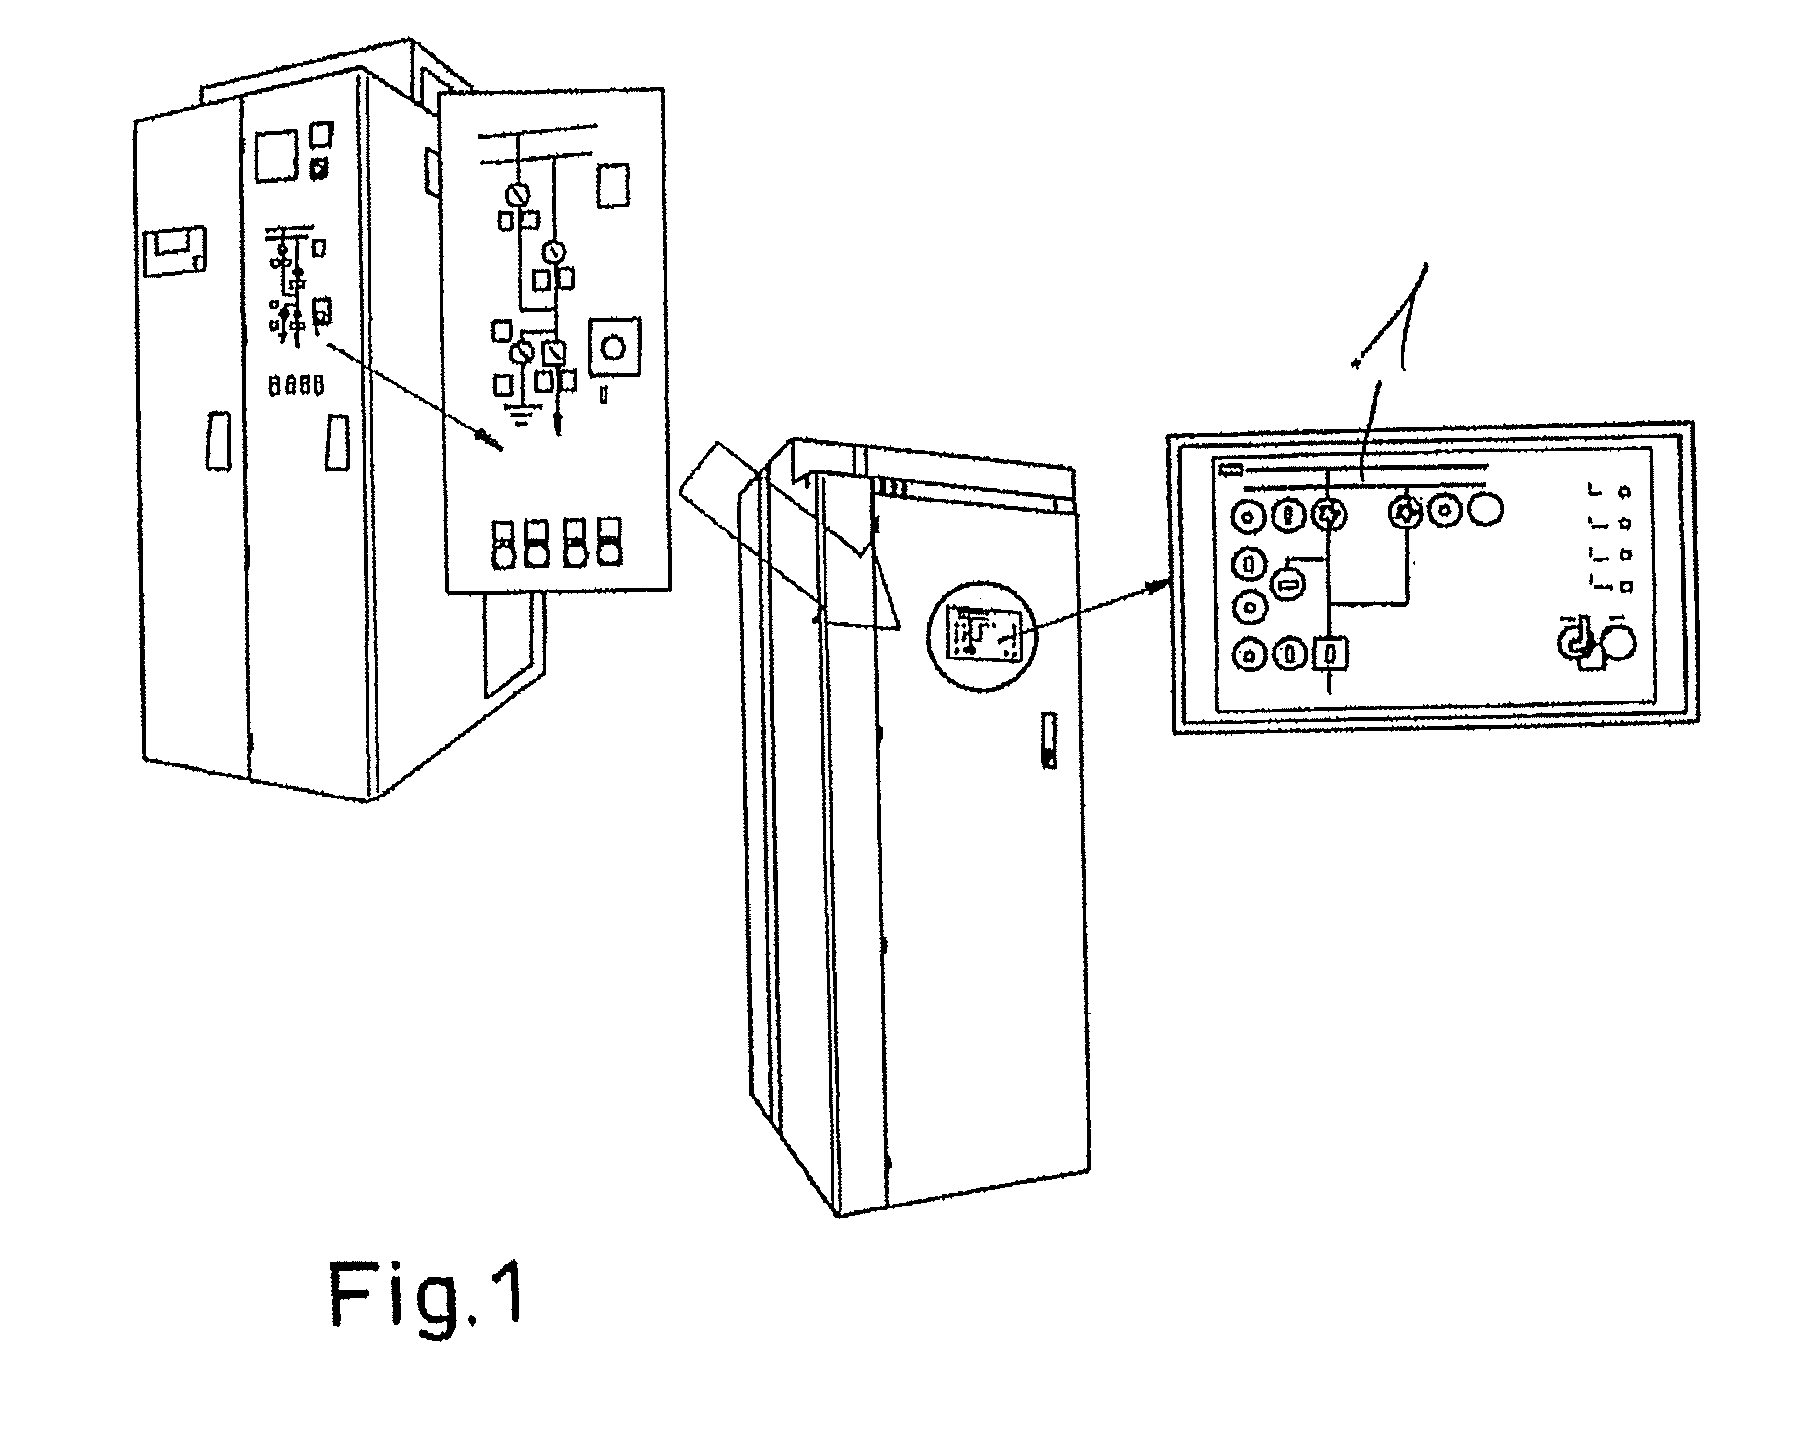 Medium-voltage or high-voltage switching or control device, in particular a switchgear assembly